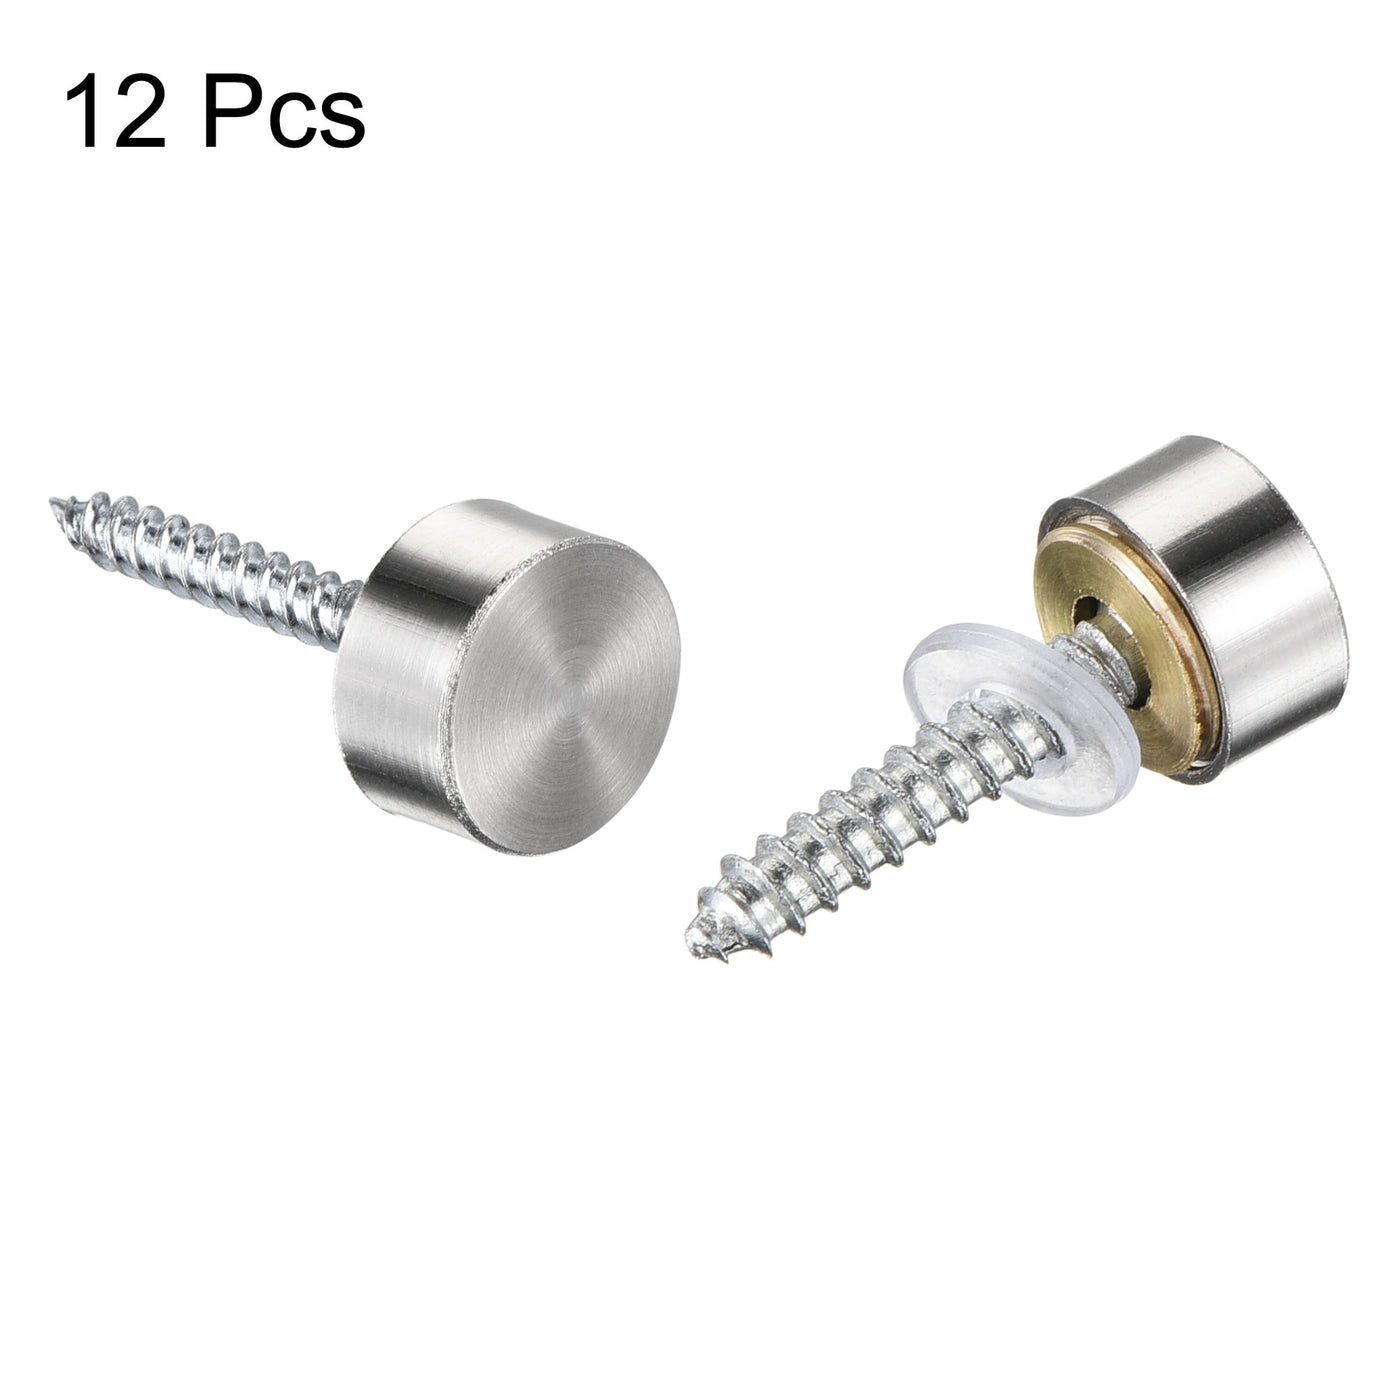 uxcell Uxcell Mirror Screws, 10mm/0.39", 12pcs Cover Nails Silver Tone 304 Stainless Steel